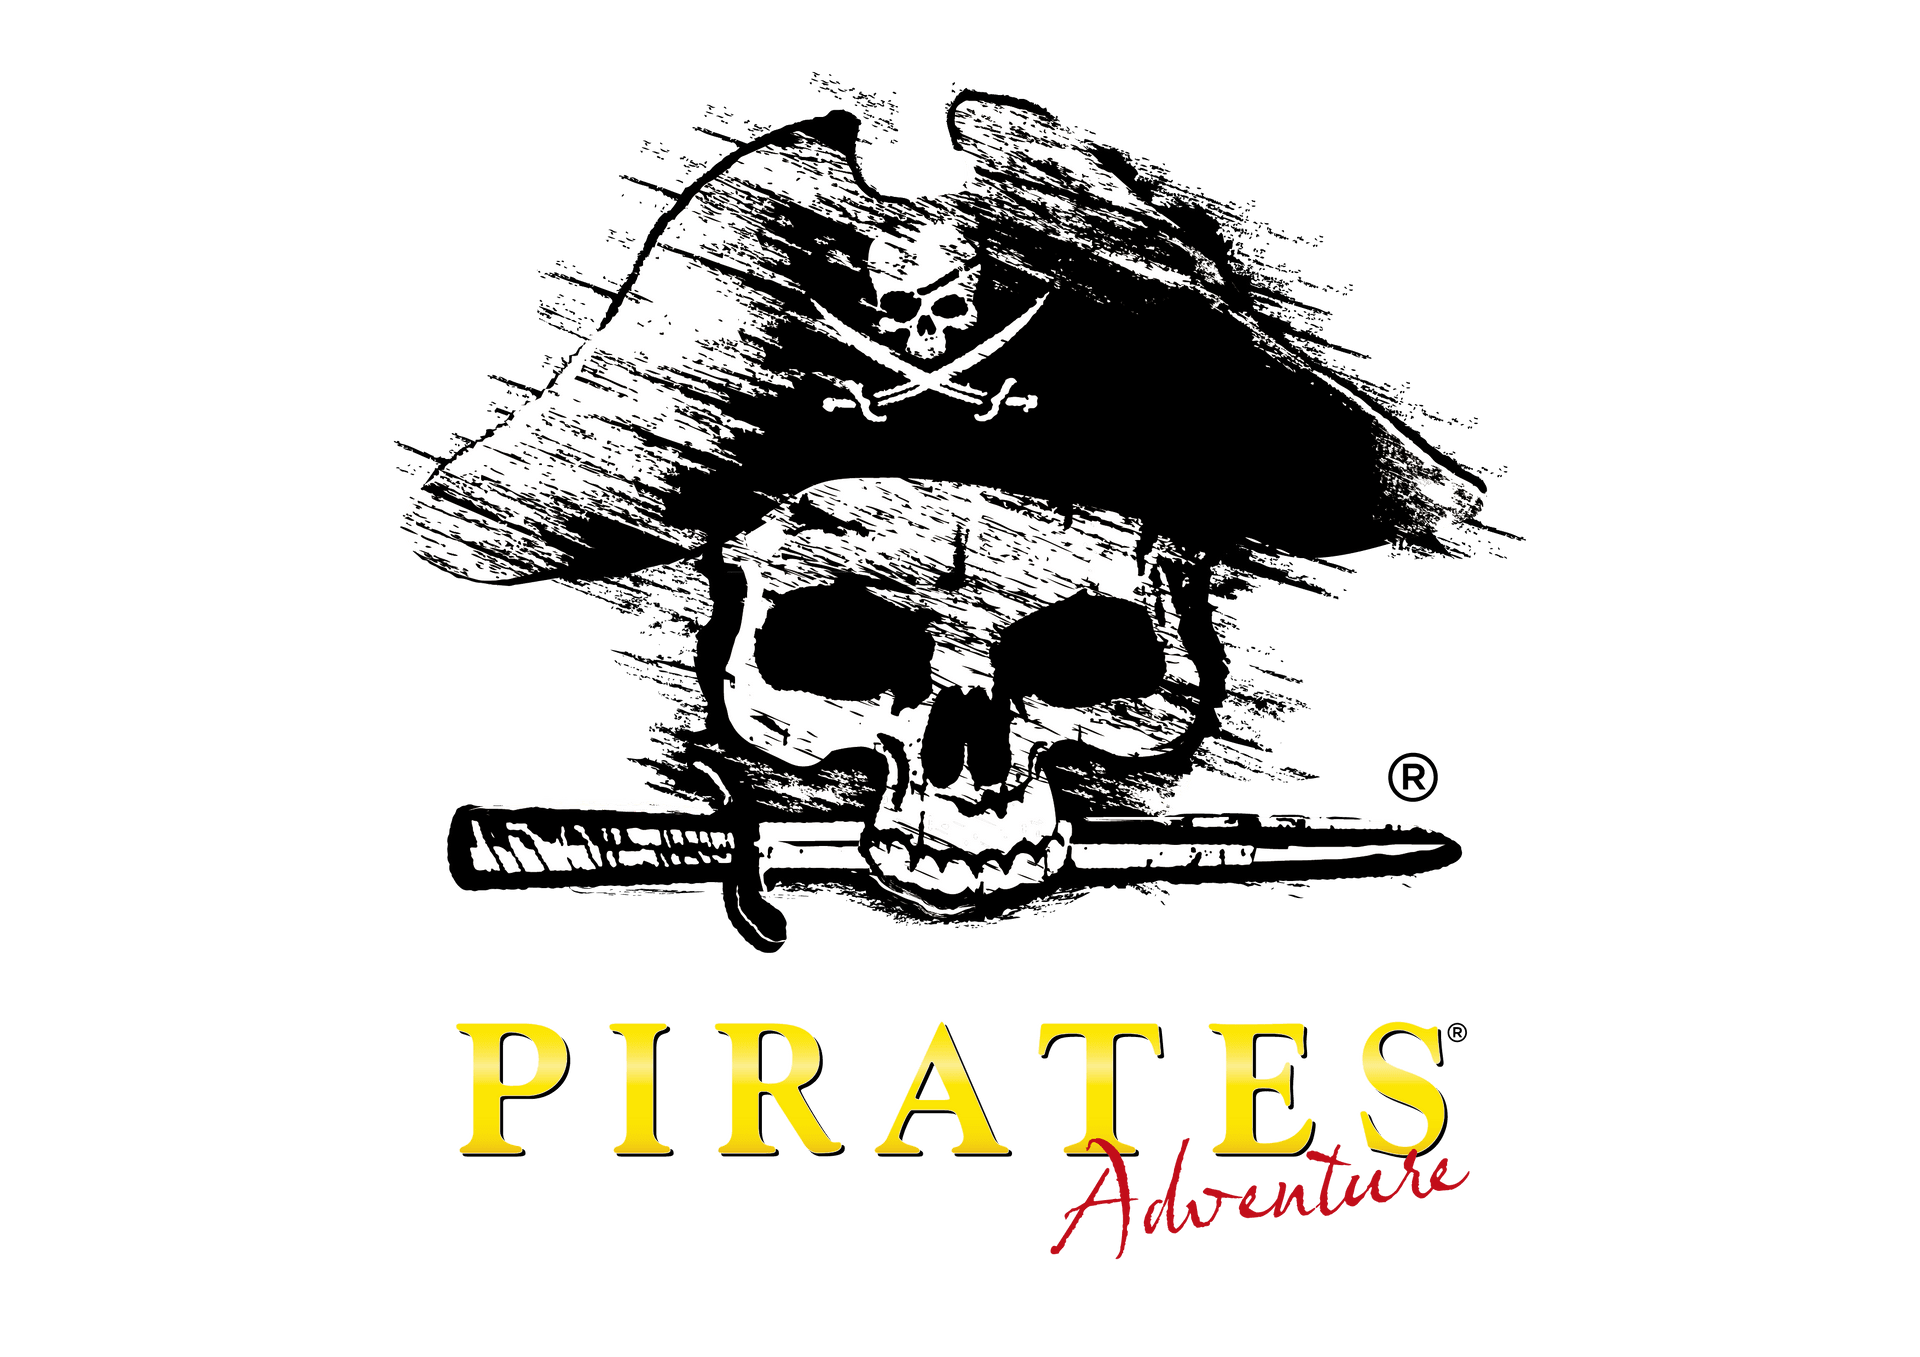 Pirates Adventure (Family Dinner Show): €35 Child - €55 Adult